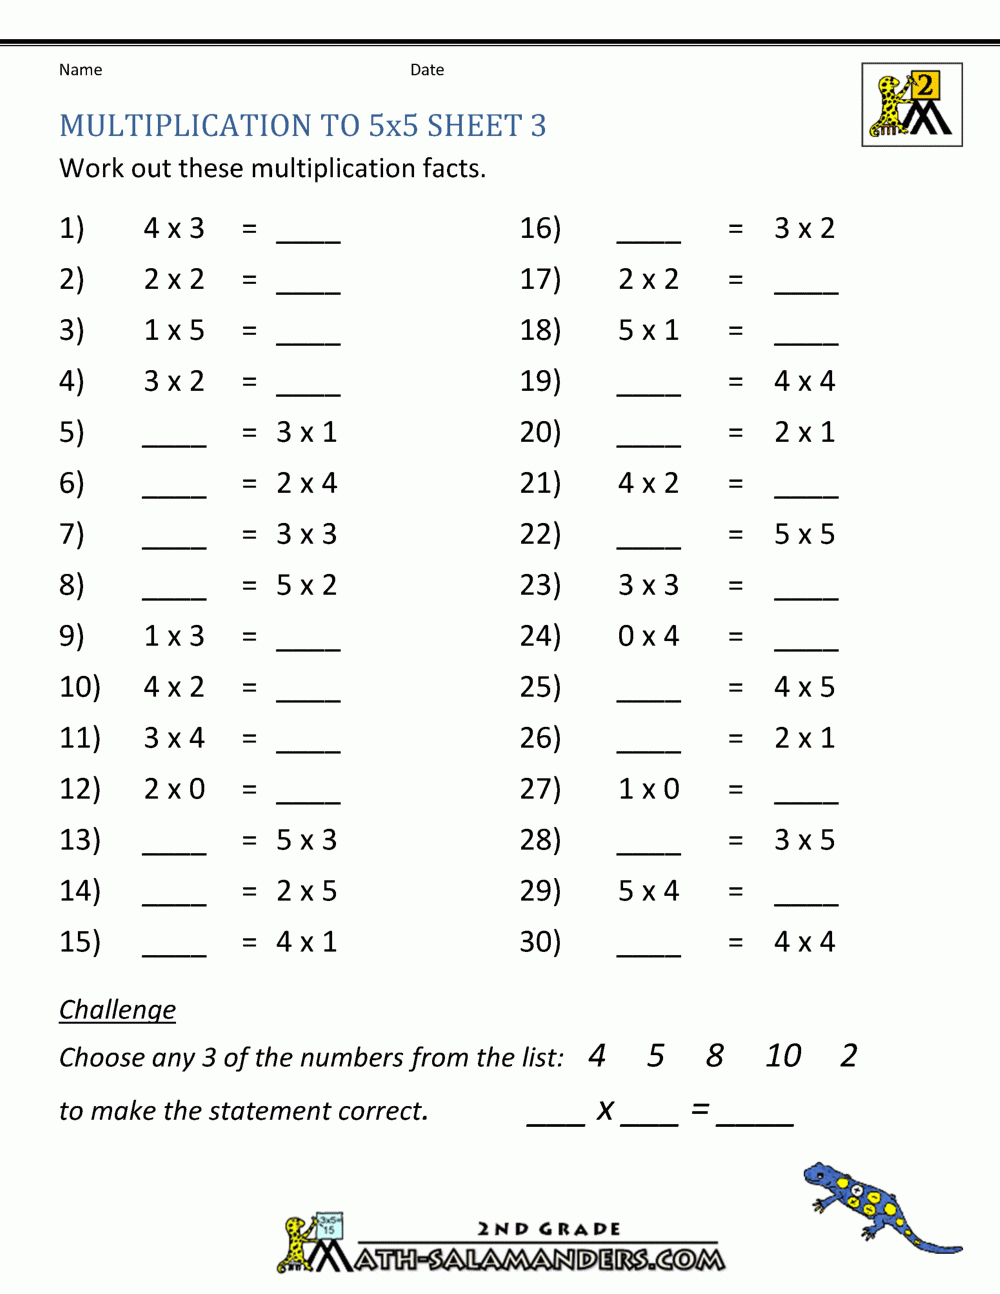 Multiplication Practice Worksheets To 5X5 intended for Printable Multiplication Drill Worksheets